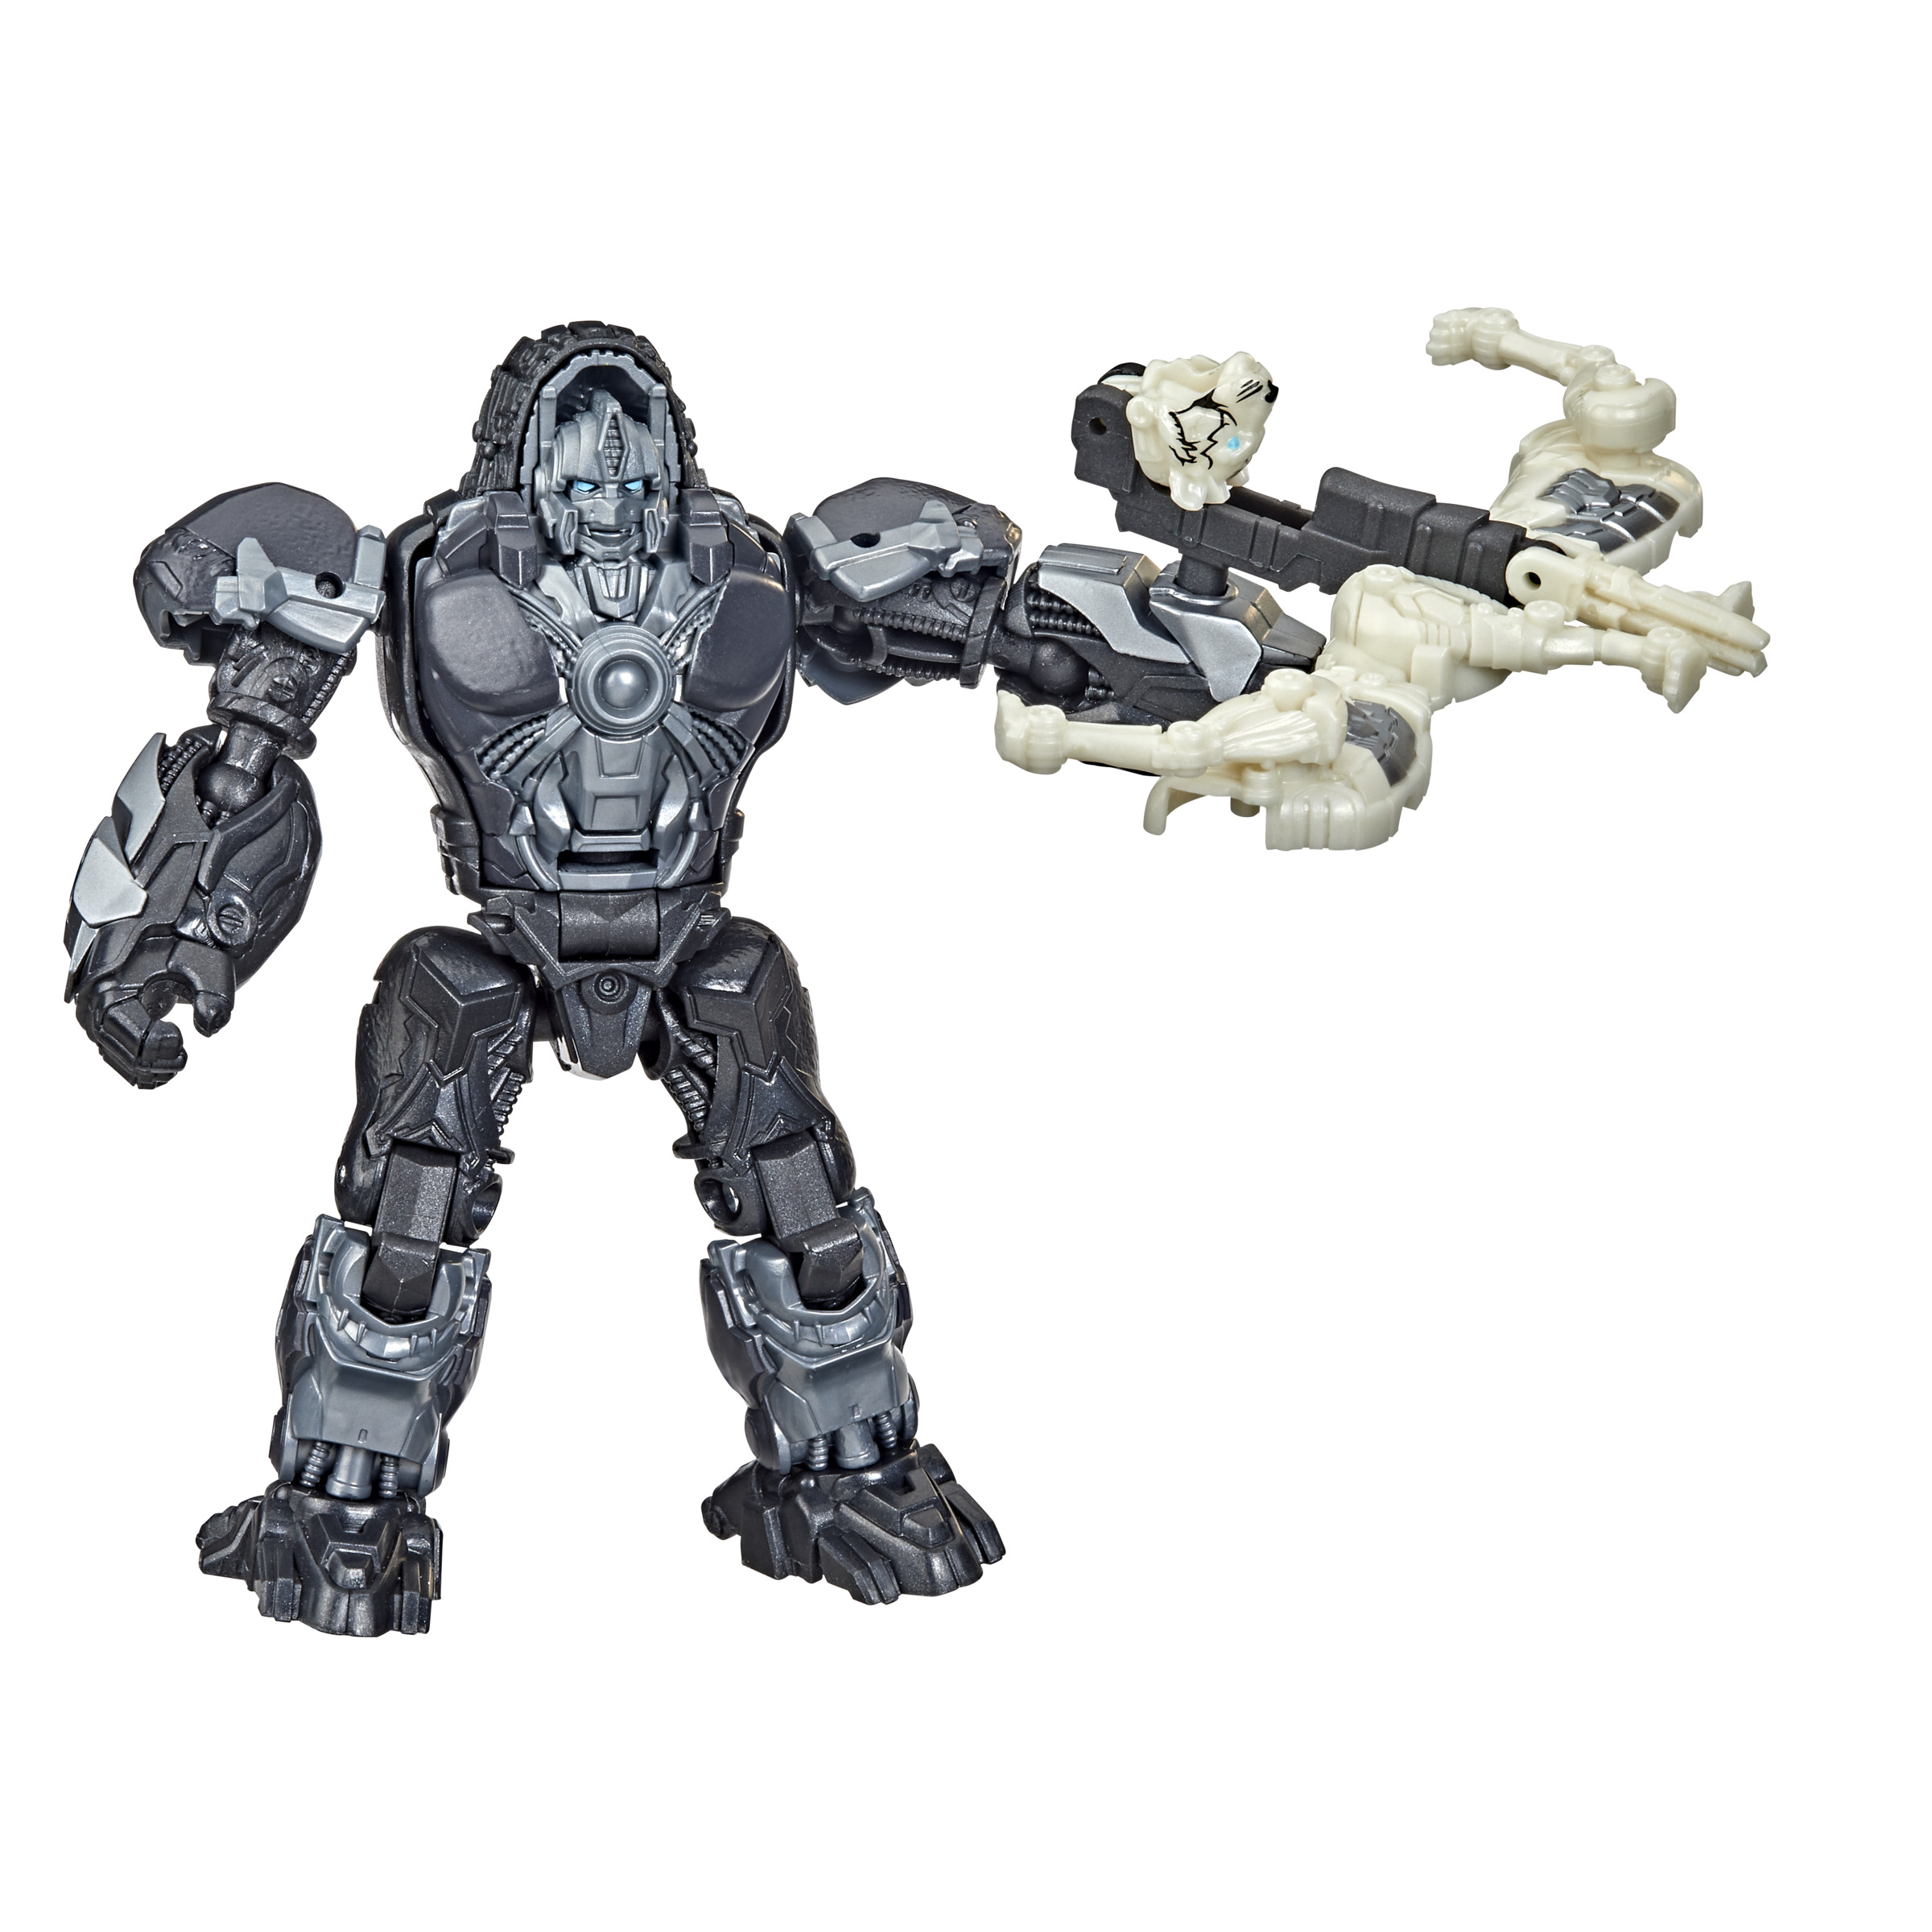 TRANSFORMERS Beast Actionfigur Weaponizers